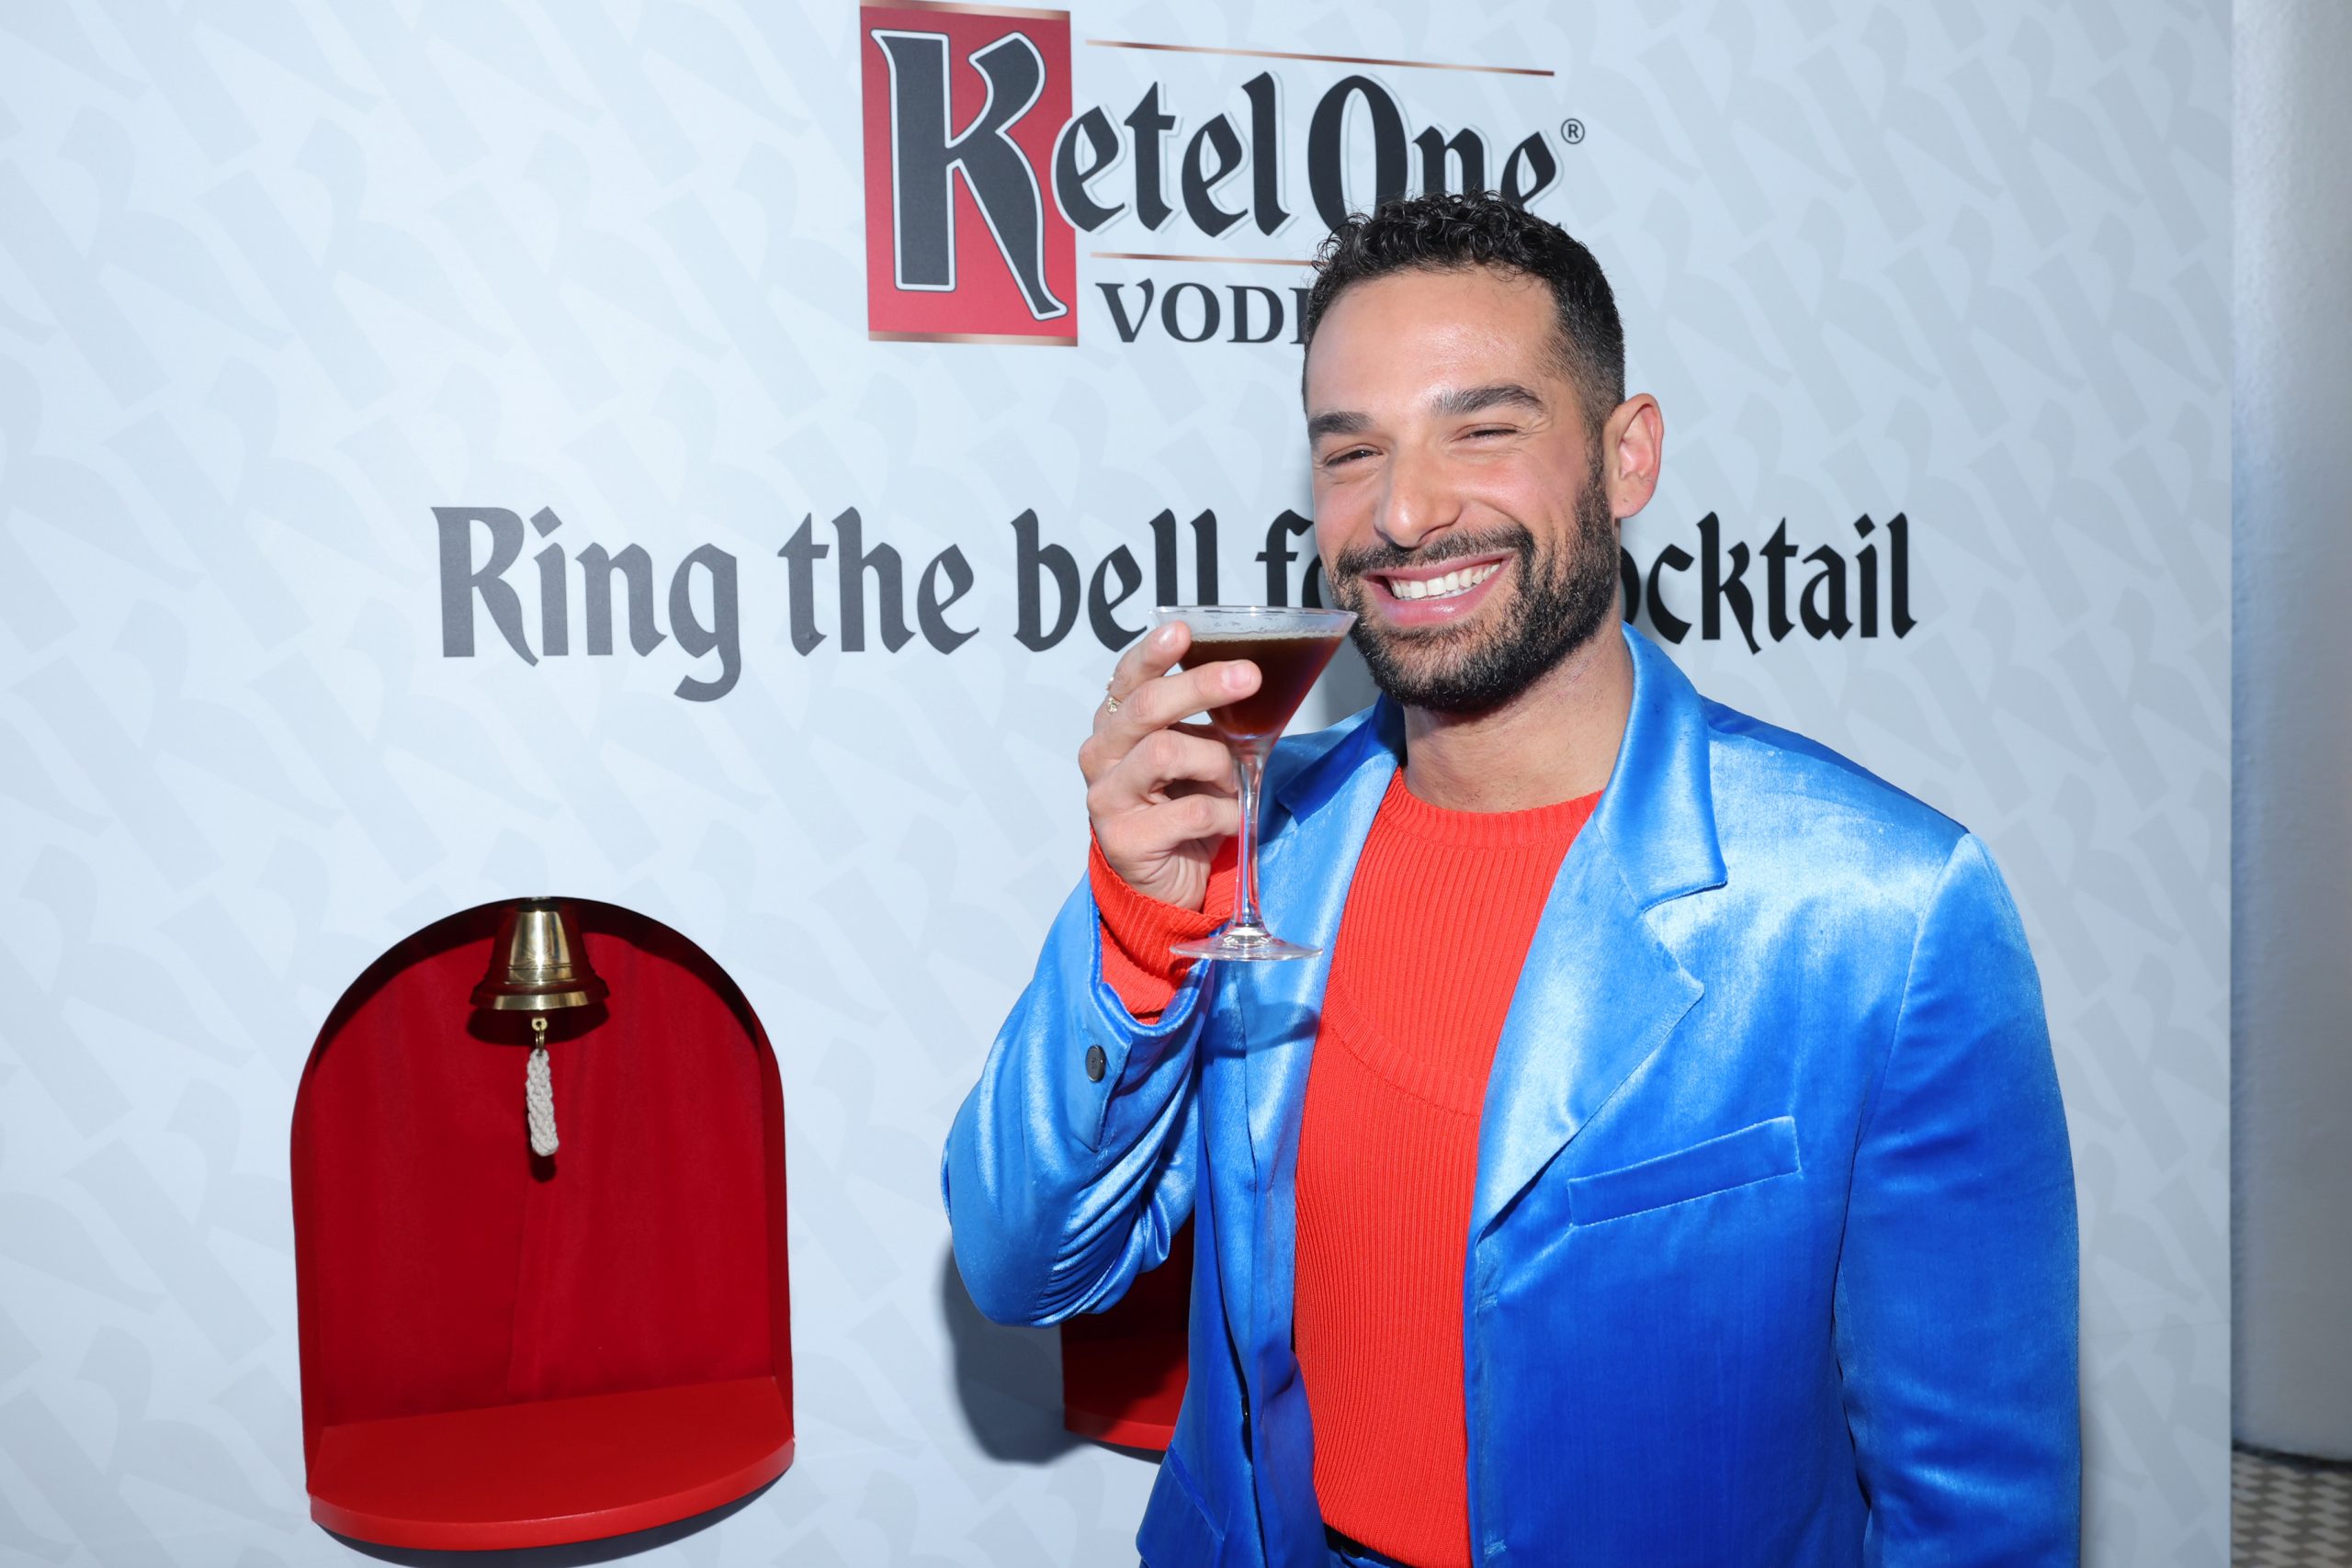 BEVERLY HILLS, CALIFORNIA - MARCH 30: Johnny Sibilly attends the 34th Annual GLAAD Media Awards Sponsored by Ketel One Family Made Vodka at The Beverly Hilton on March 30, 2023 in Beverly Hills, California. (Photo by Rich Polk/Getty Images for Ketel One)